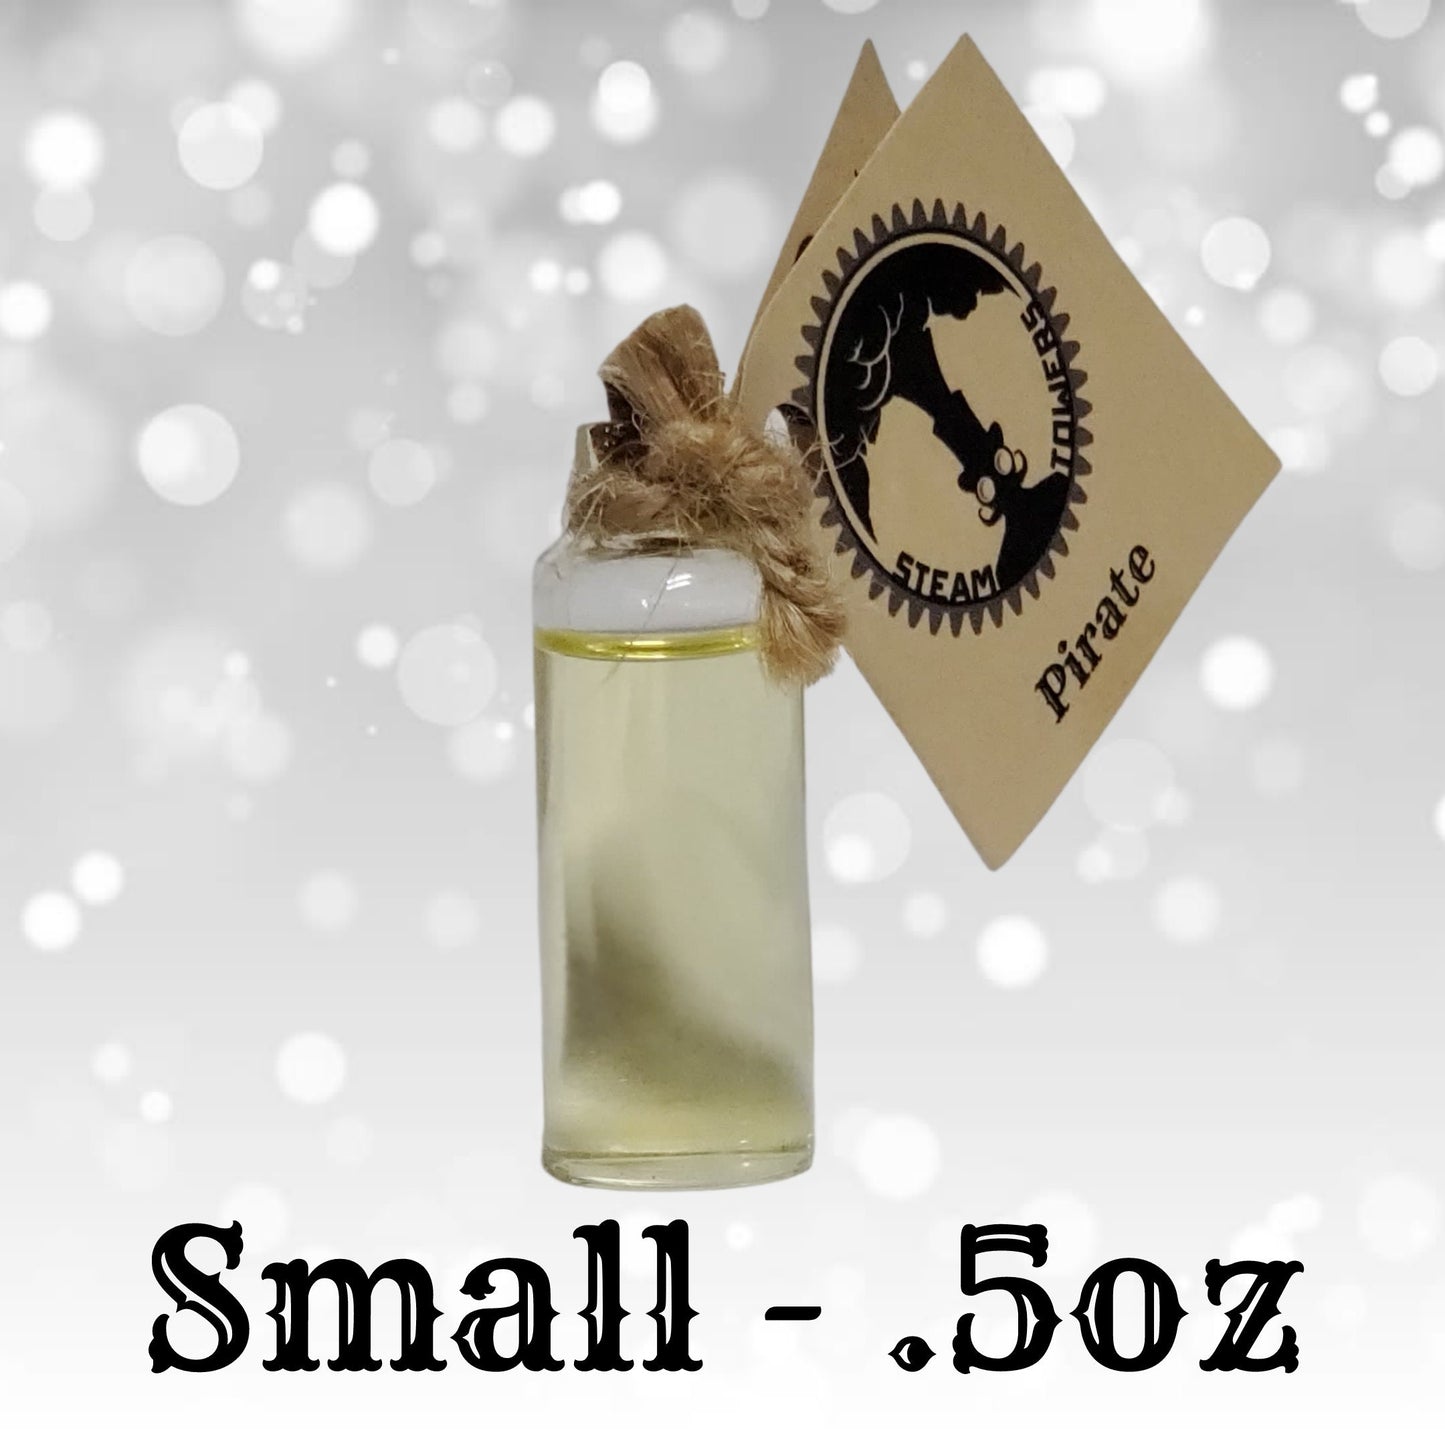 SALE! Steampunk Pirate Scented Beard and Hair Oil